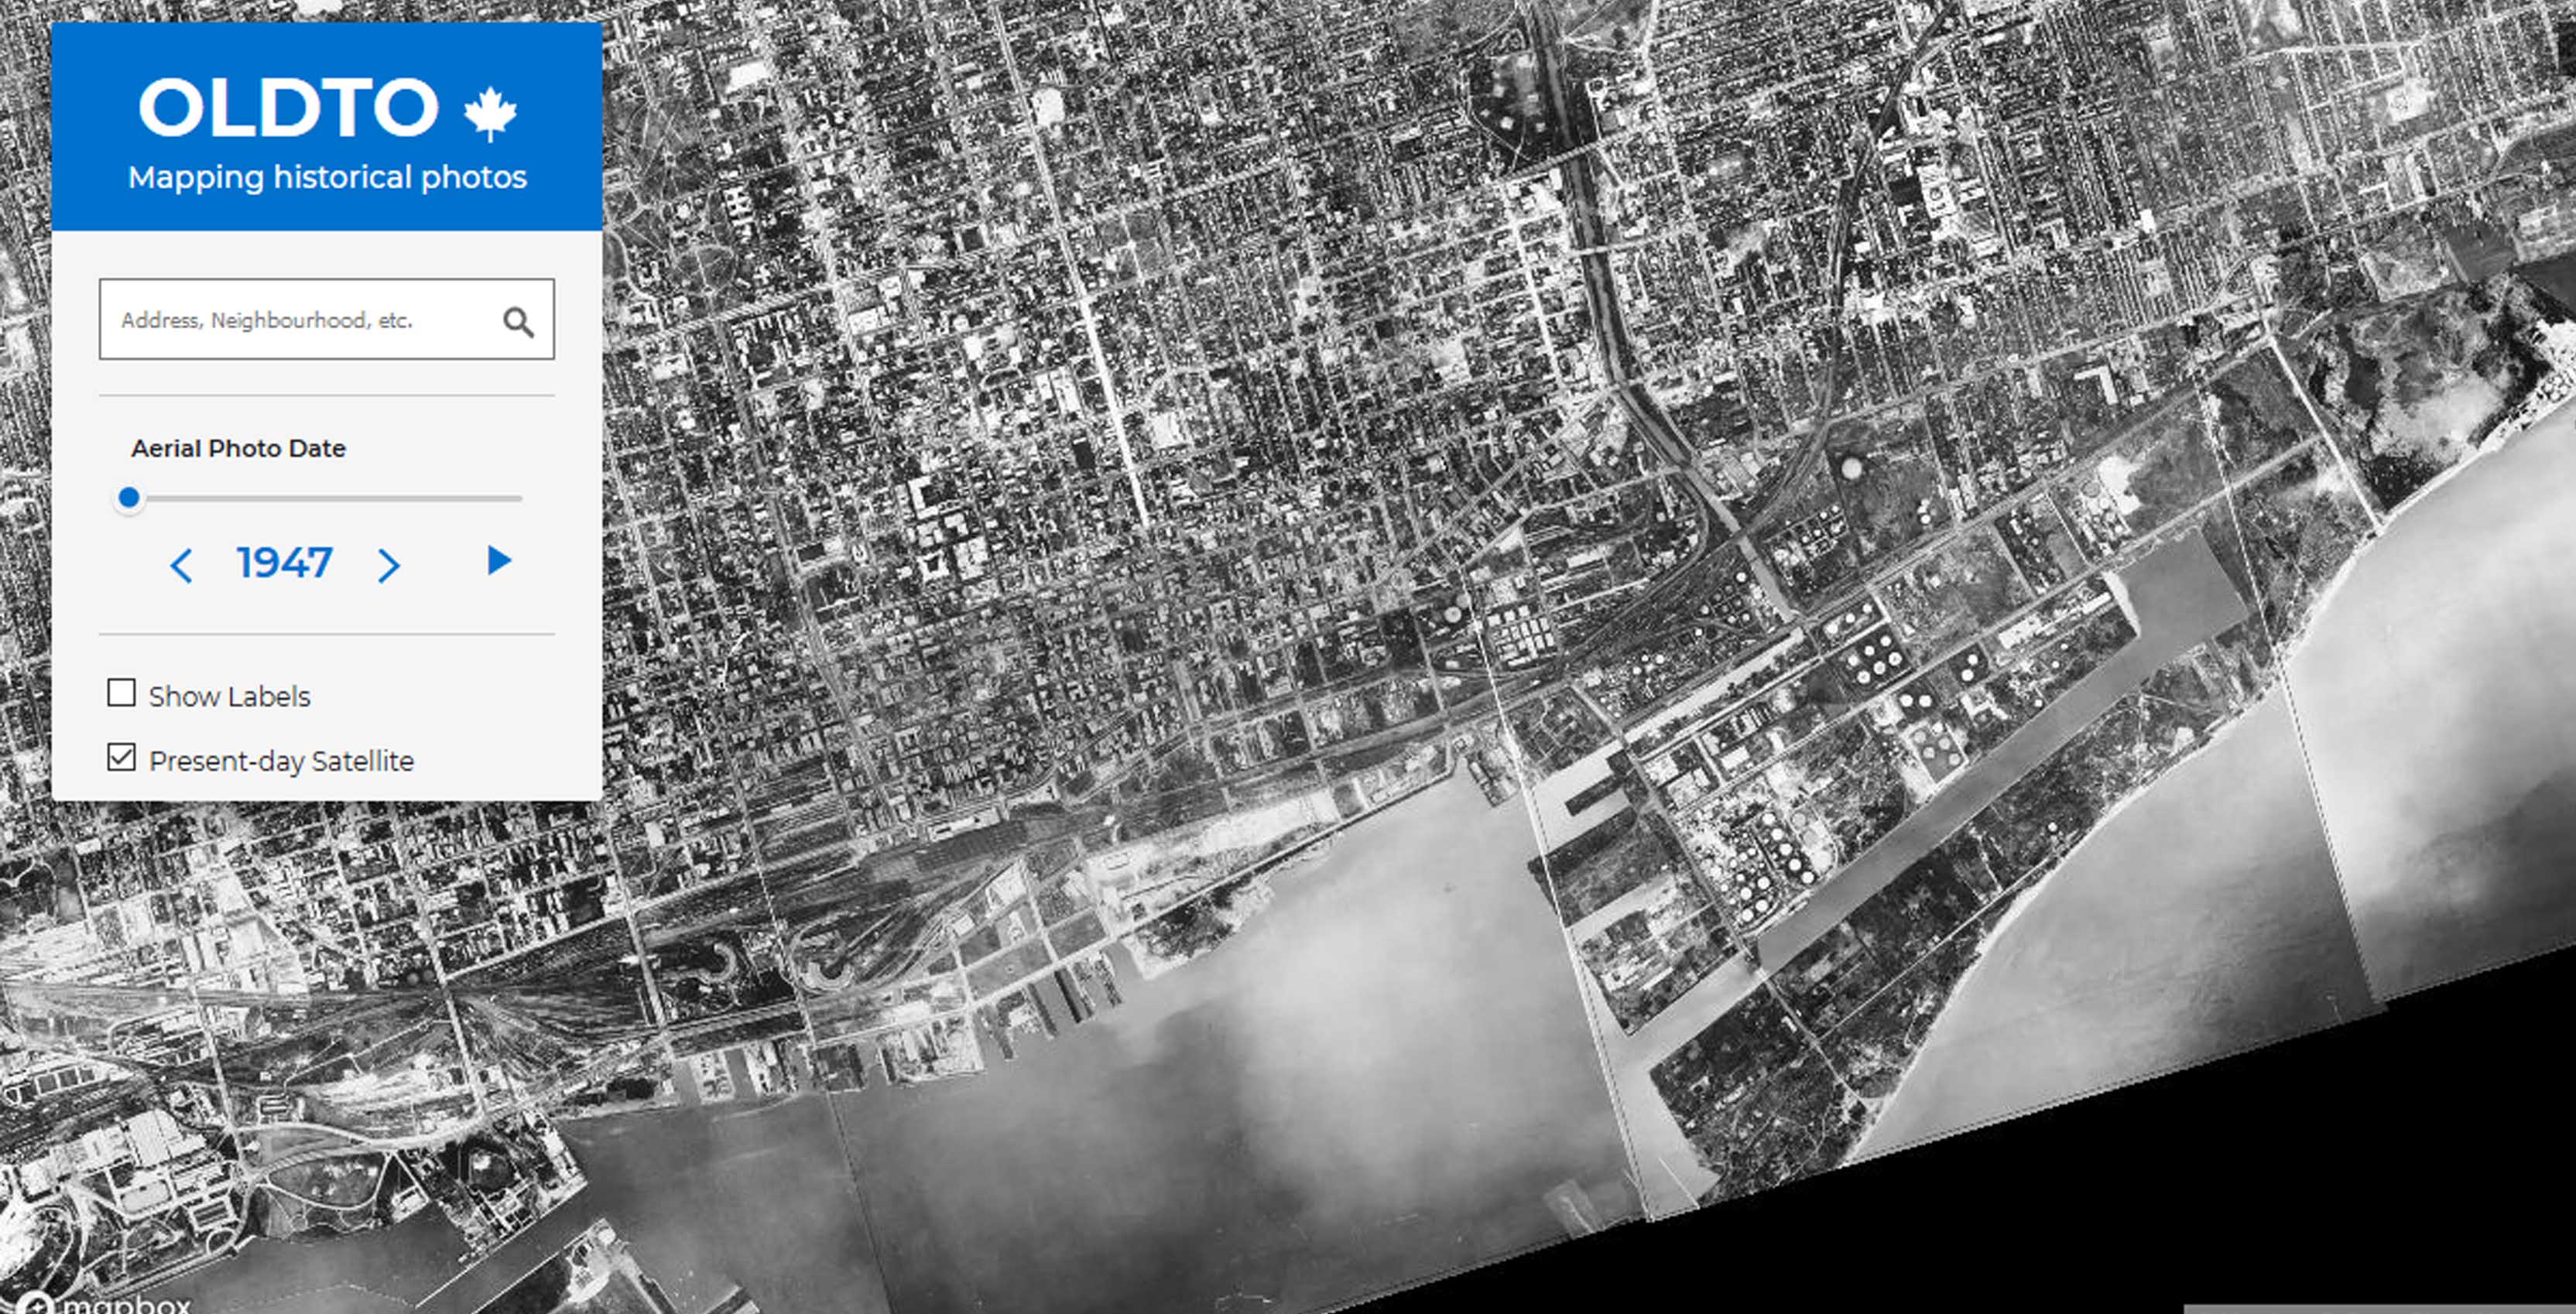 Aerial map of Toronto in 1947 shown by Old Toronto